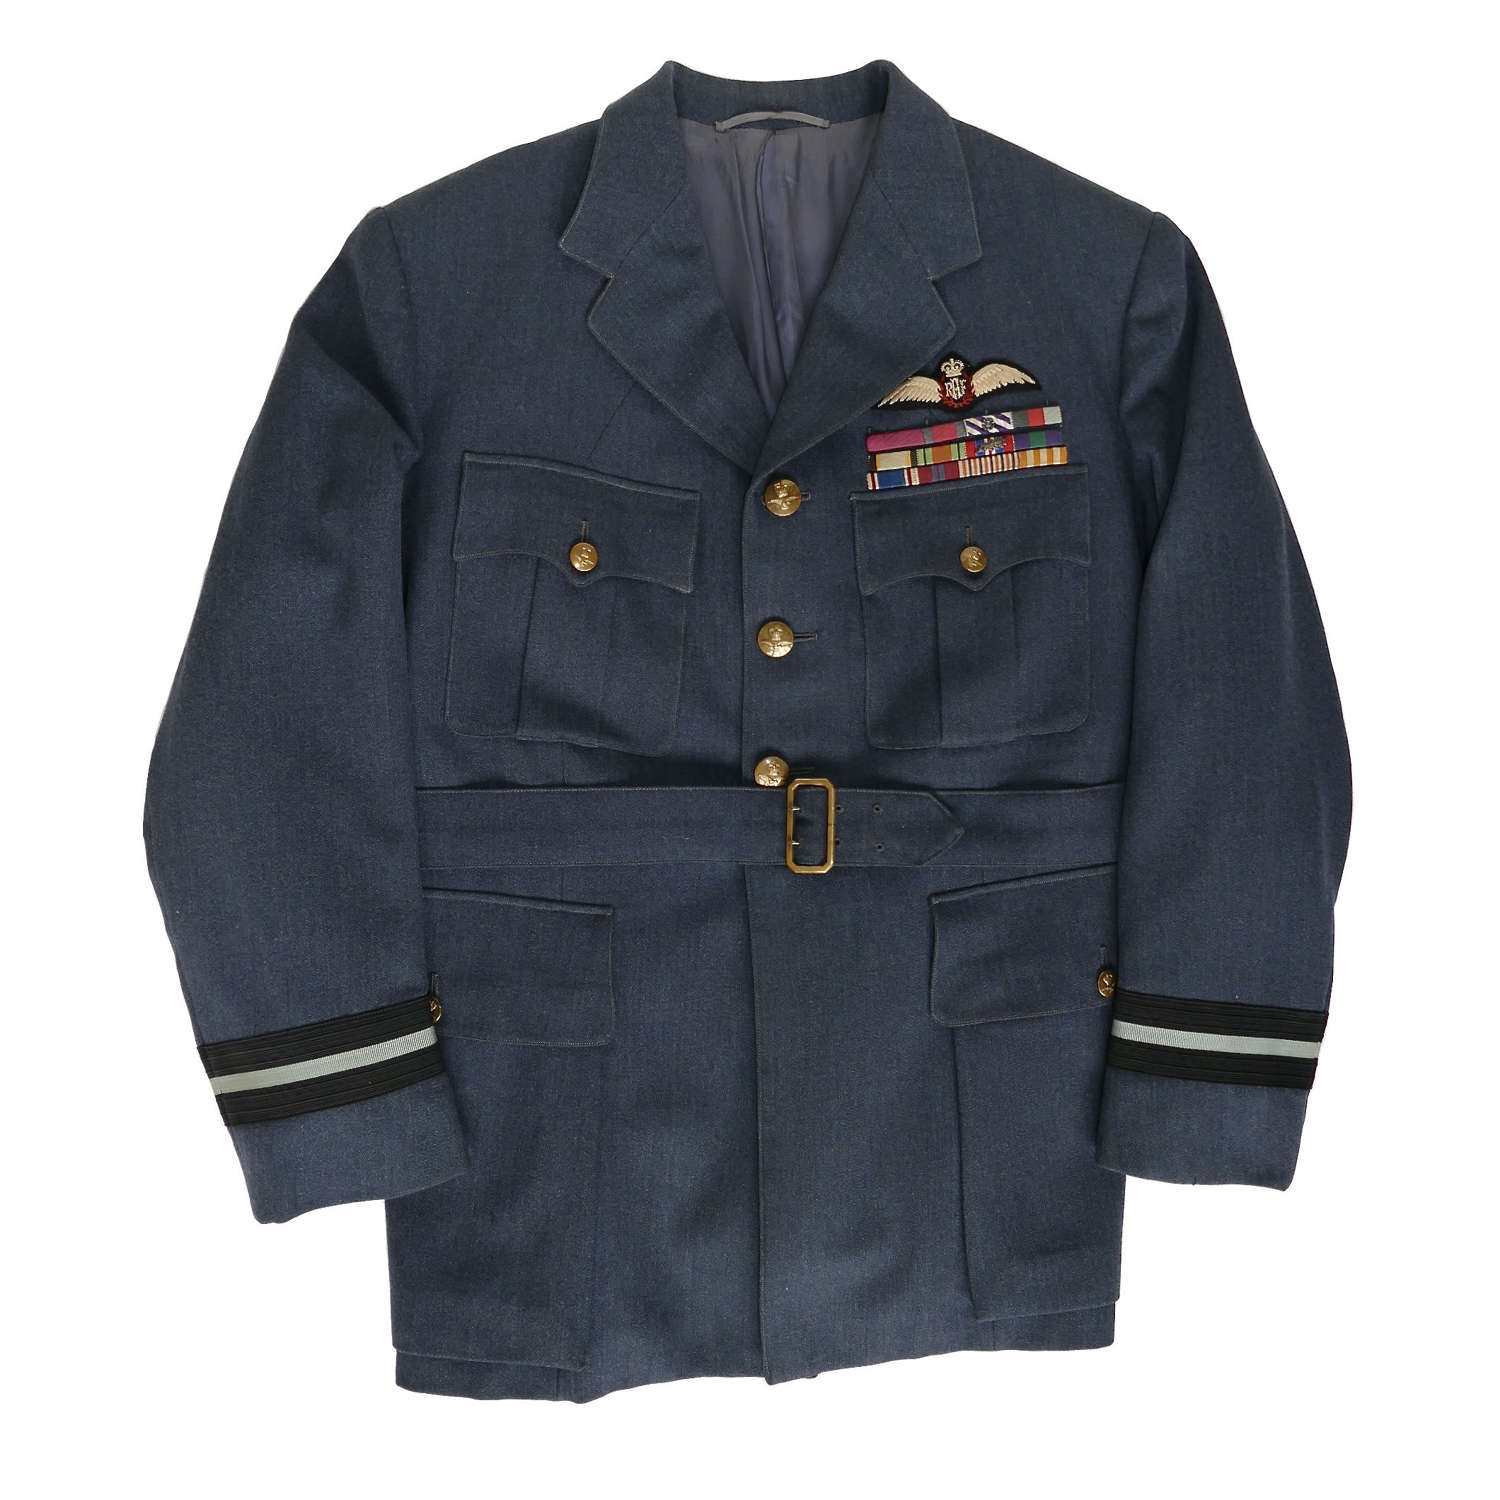 RAF SD tunic of Air Commodore John Whitworth (Dam Buster related)